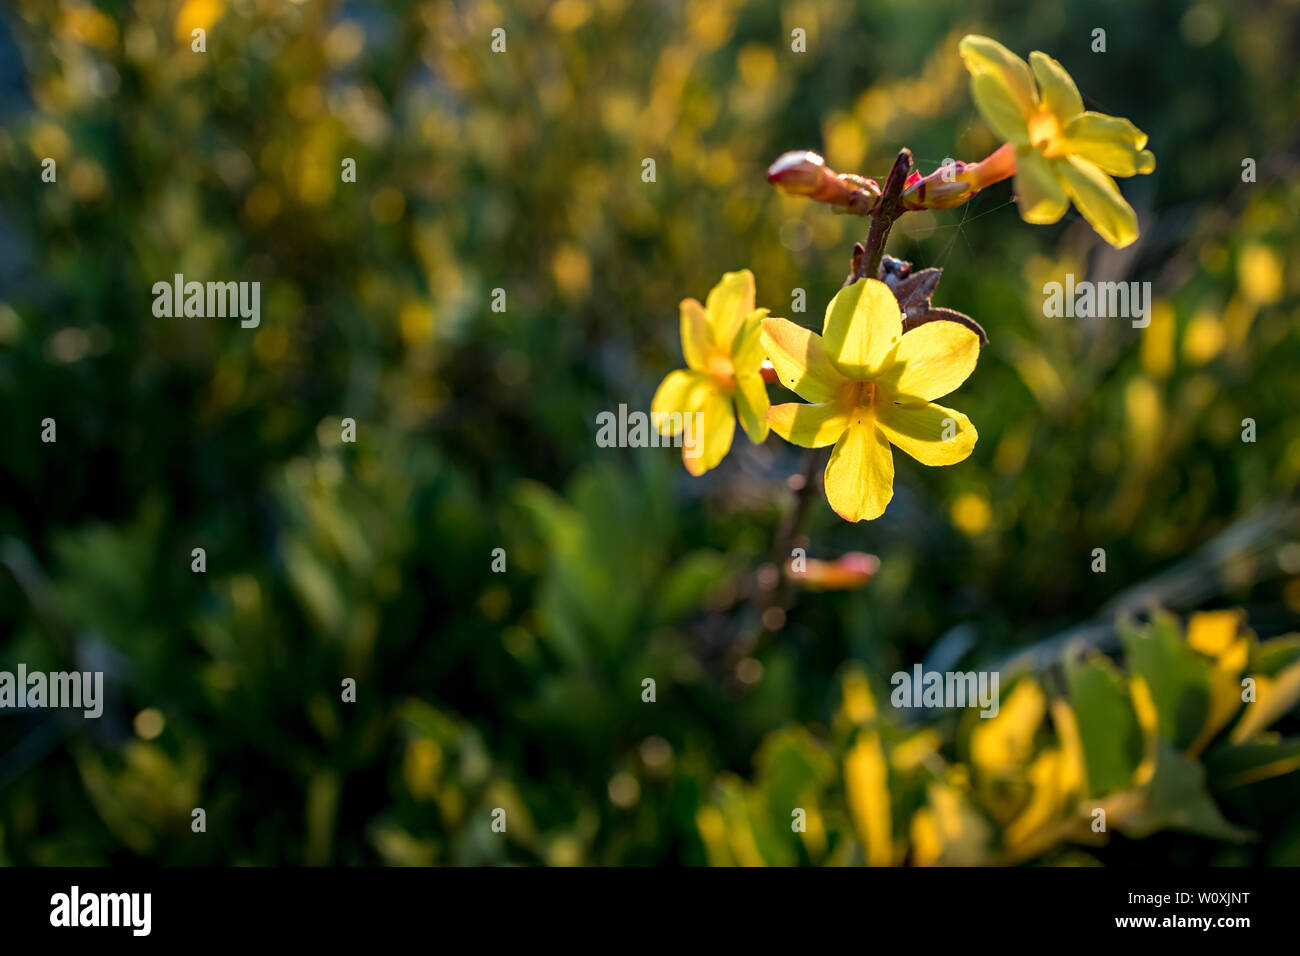 Flowering bush branch with bright colorful yellow spring blossom, selective focus of flower with green blurred background. Six petals, spider web cobweb threads Stock Photo